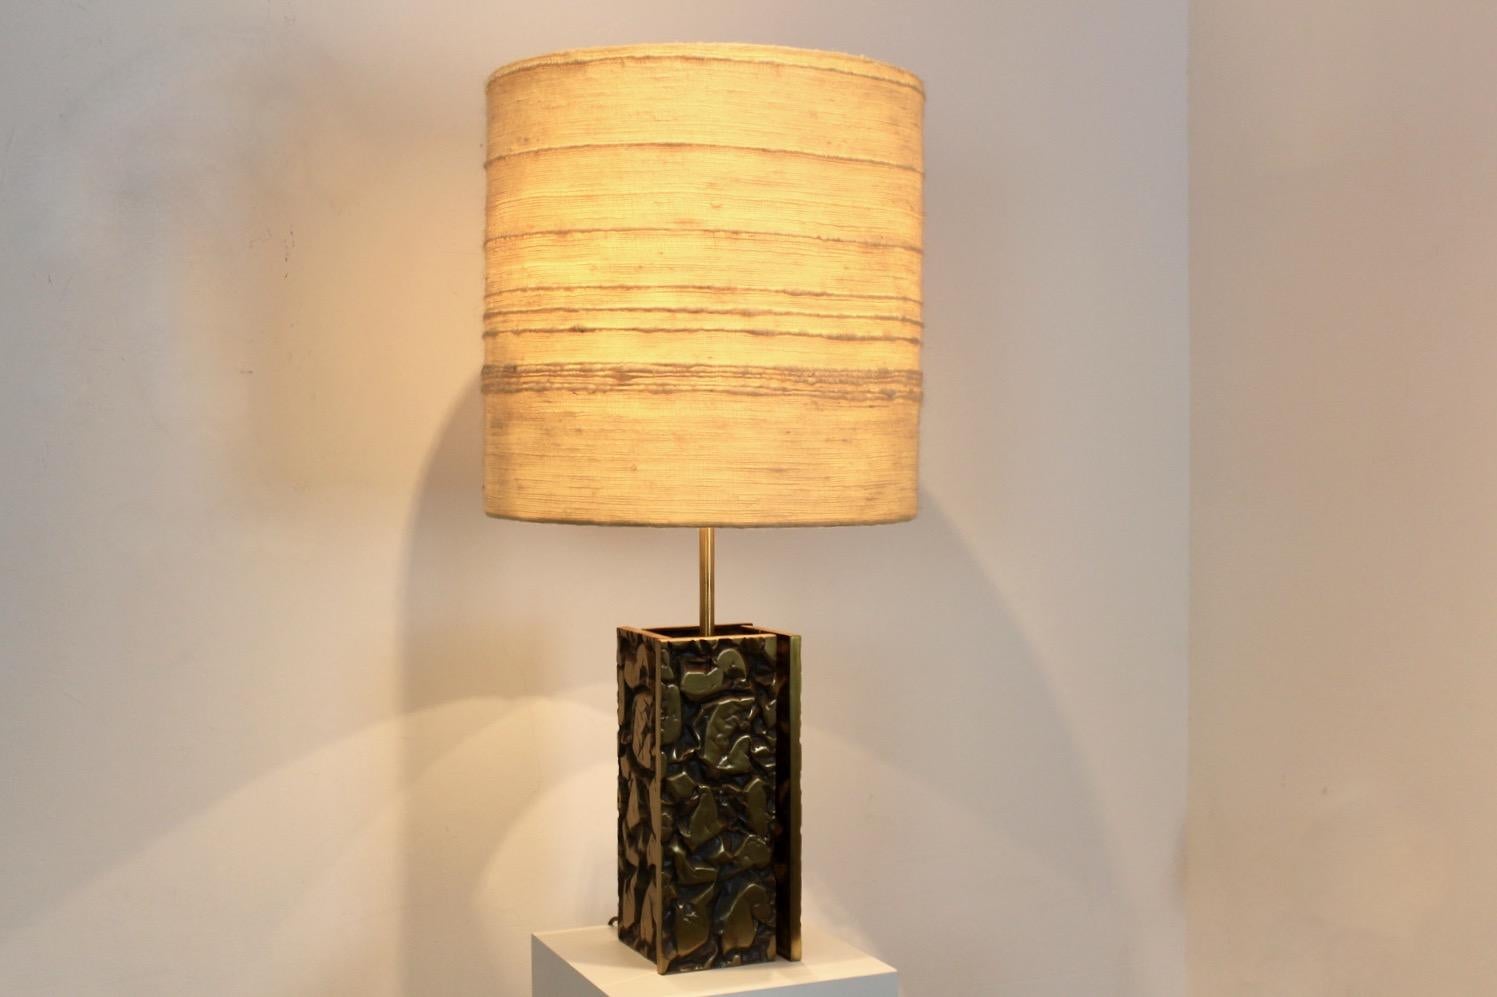 Stunning Brutalist Metal Sculptured Table Lamp with Raw Woolen Structured Shade For Sale 2